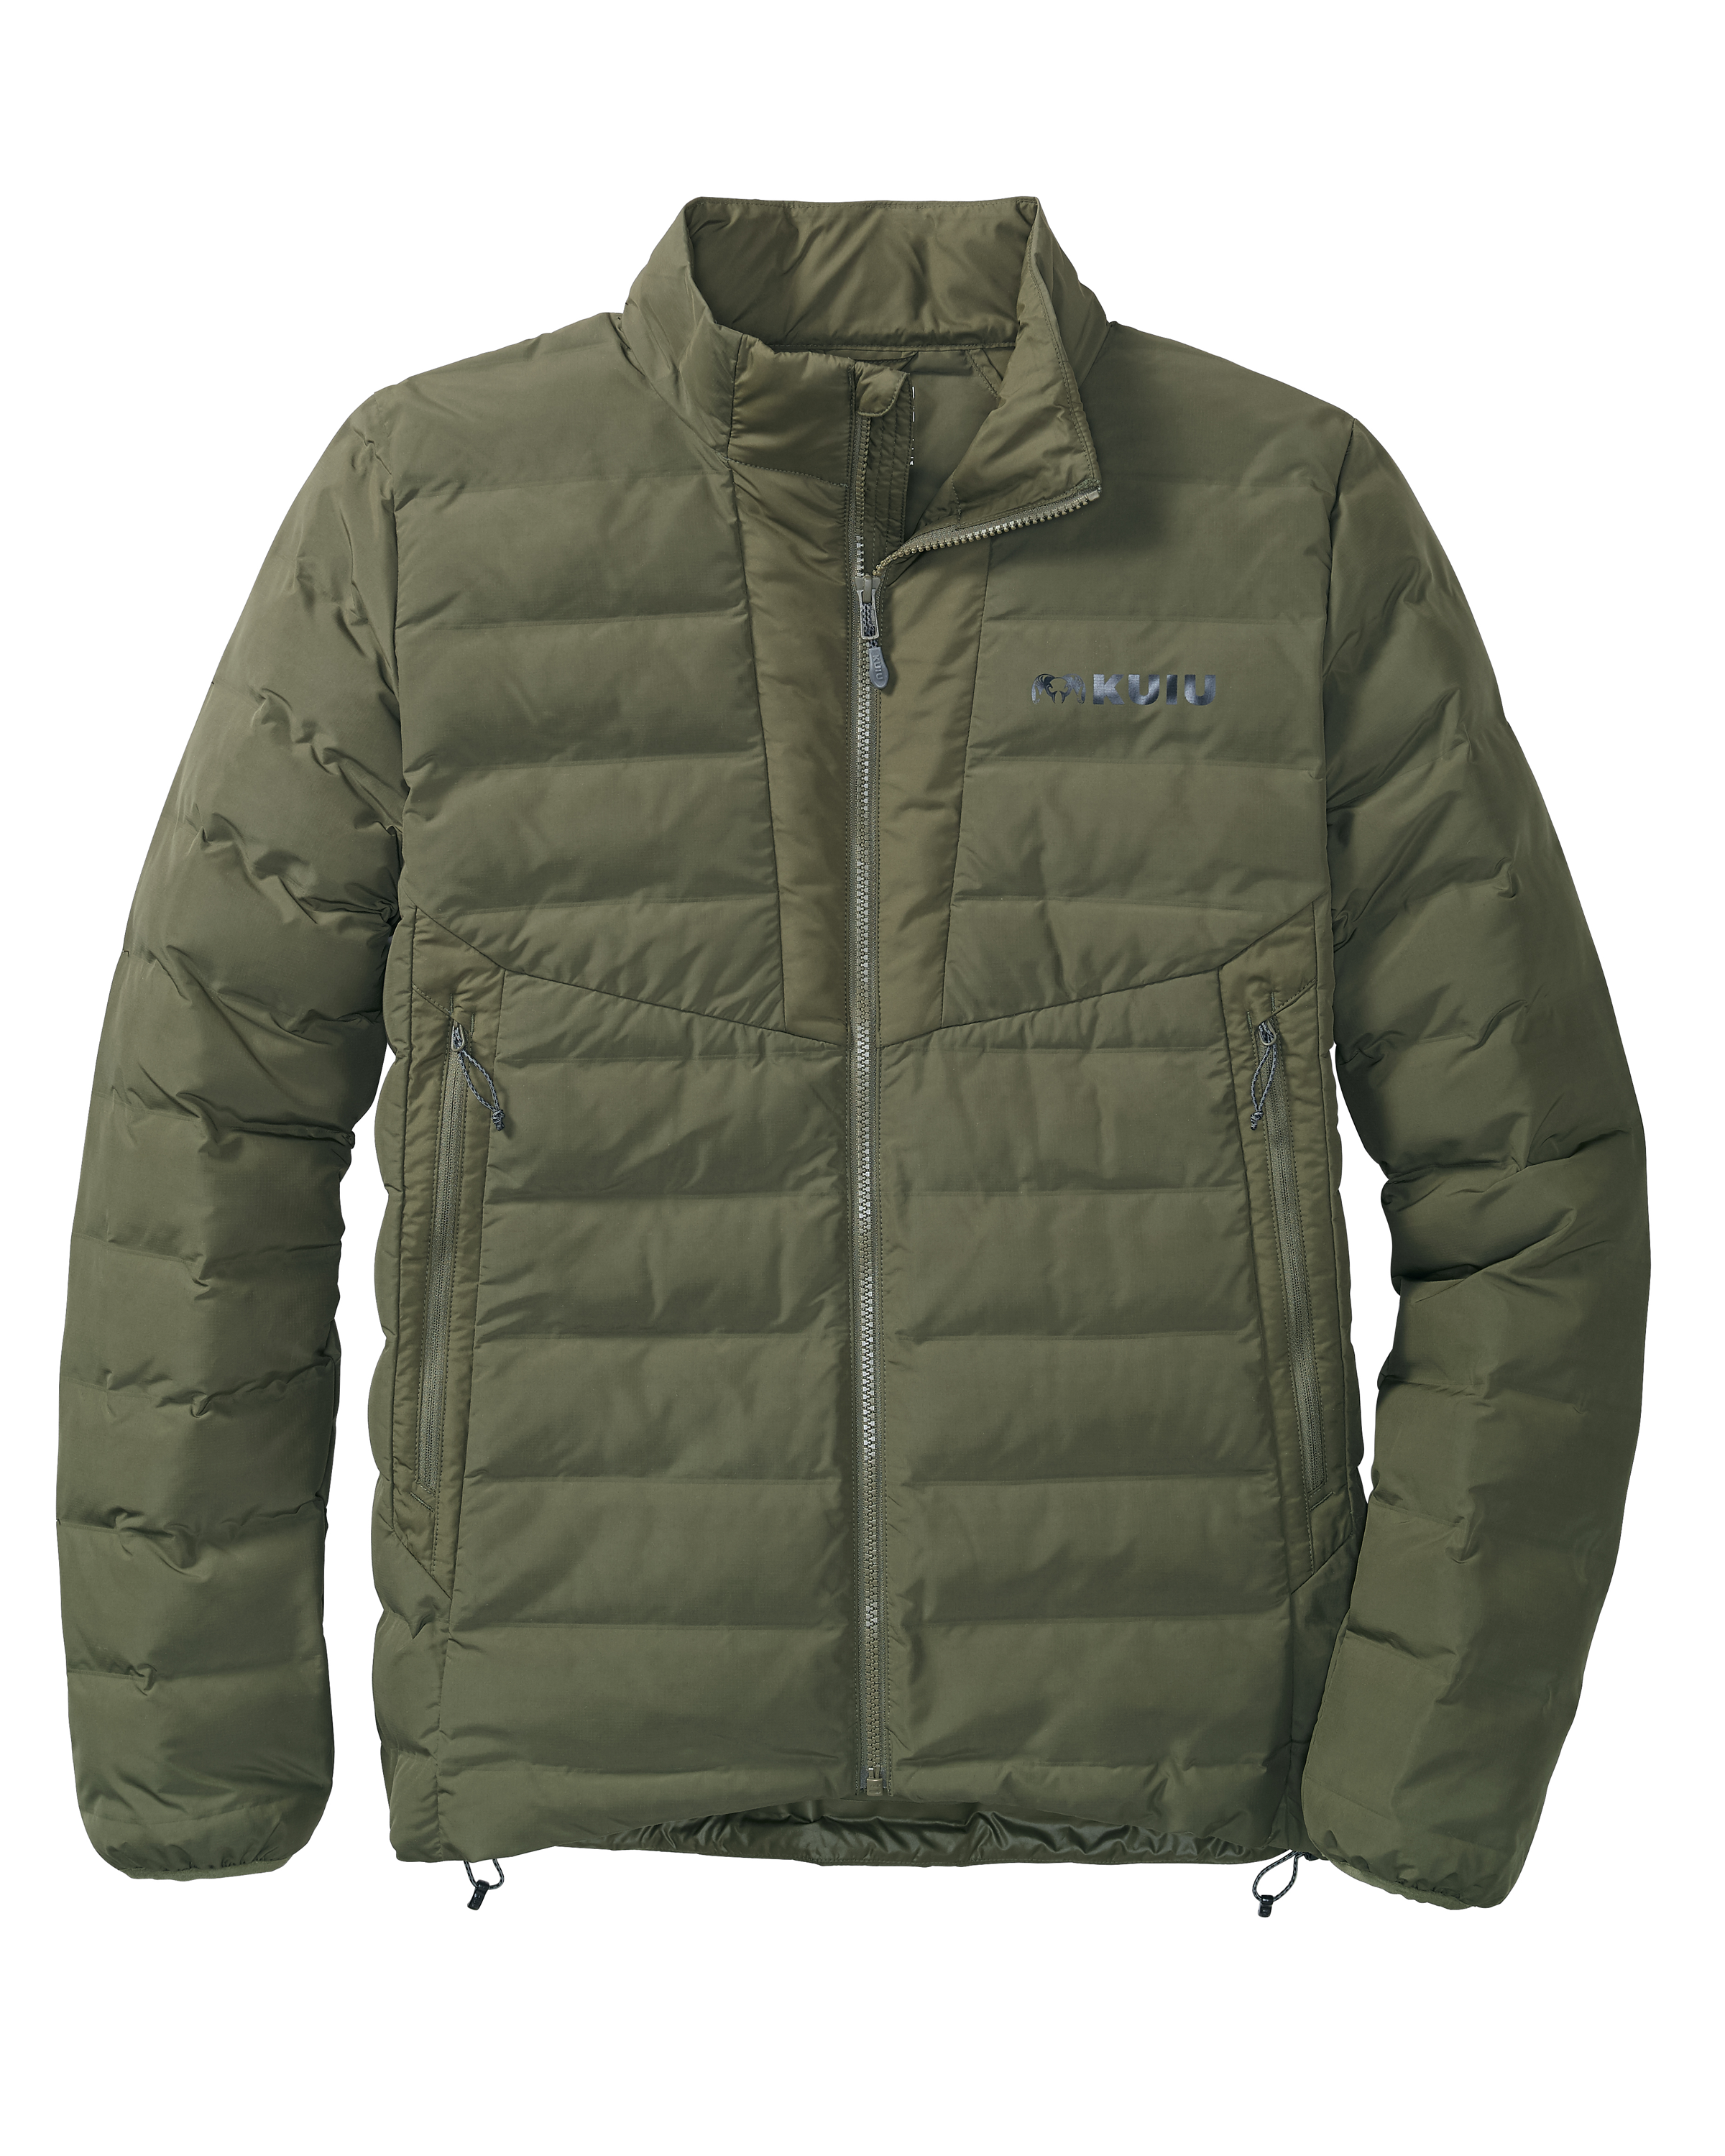 KUIU Elements Hunting Jacket in Olive | Size XL